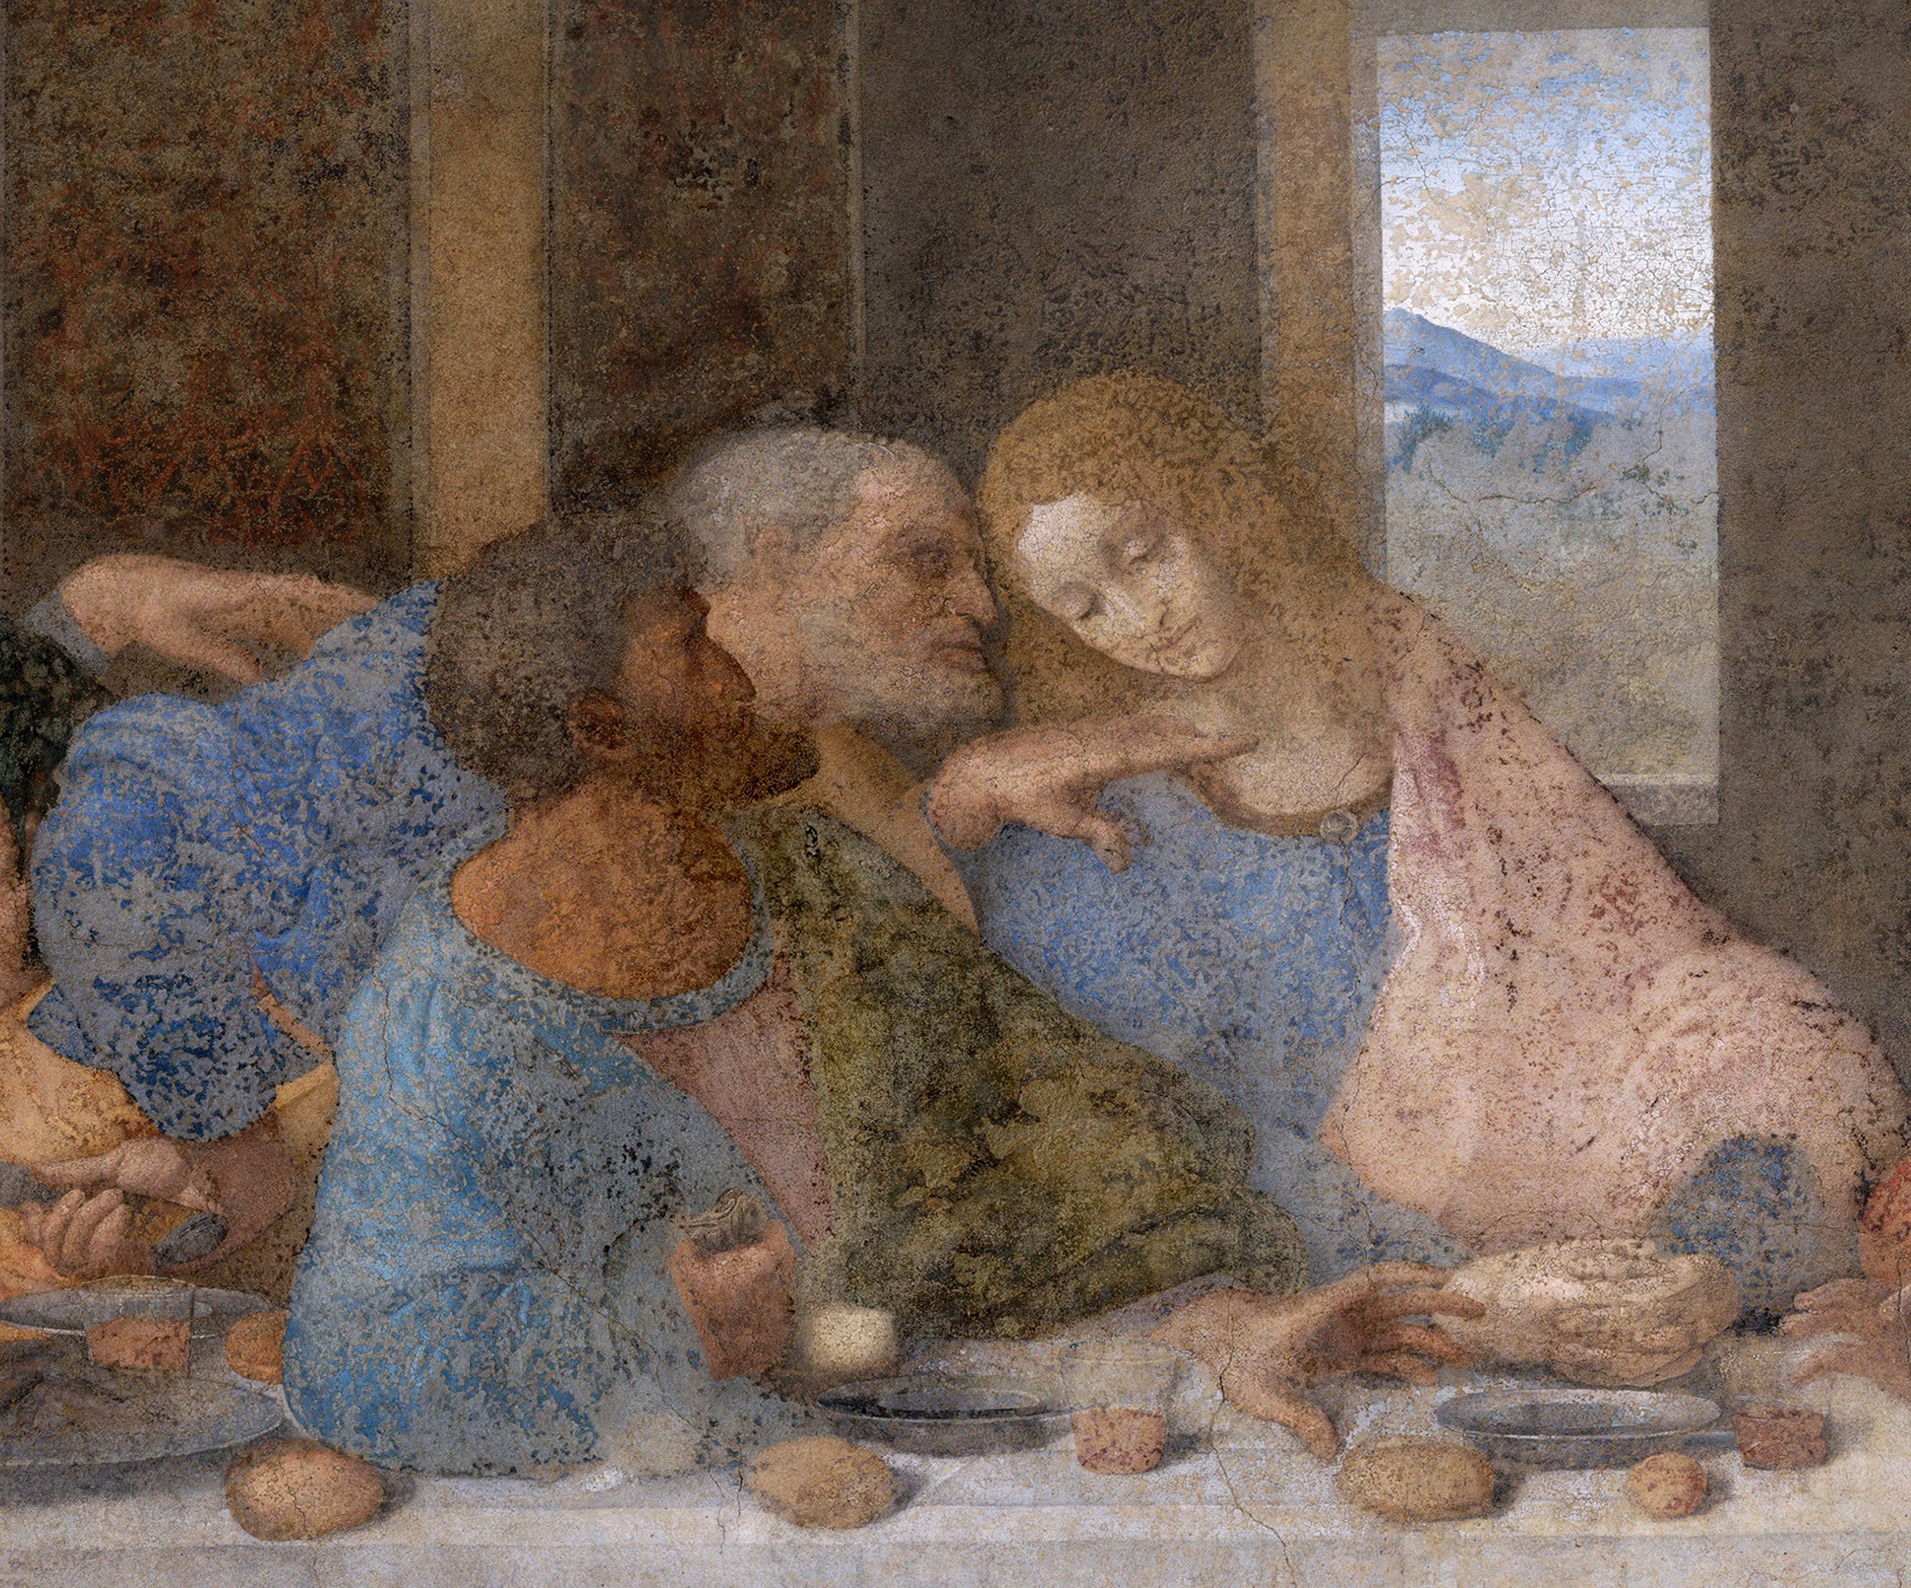 Peter, Judas, and John in the Last Supper - the last supper art analysis